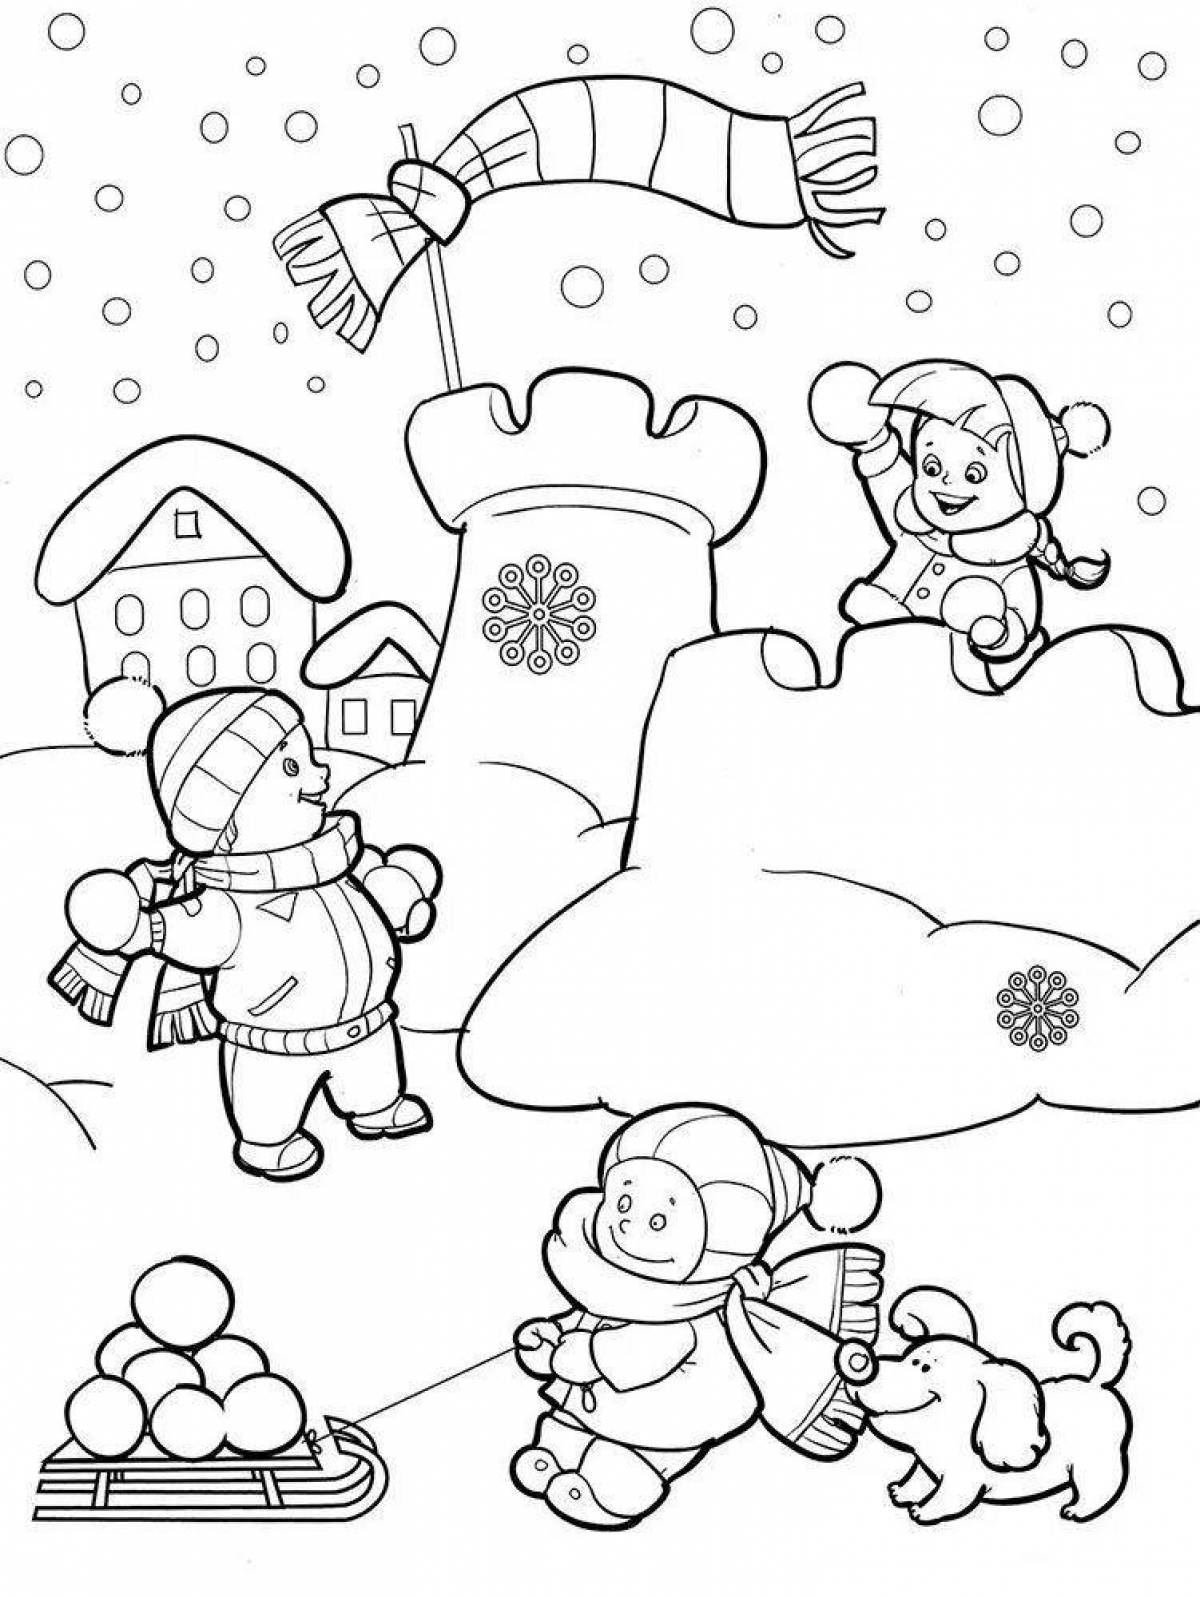 Charming winter games coloring book